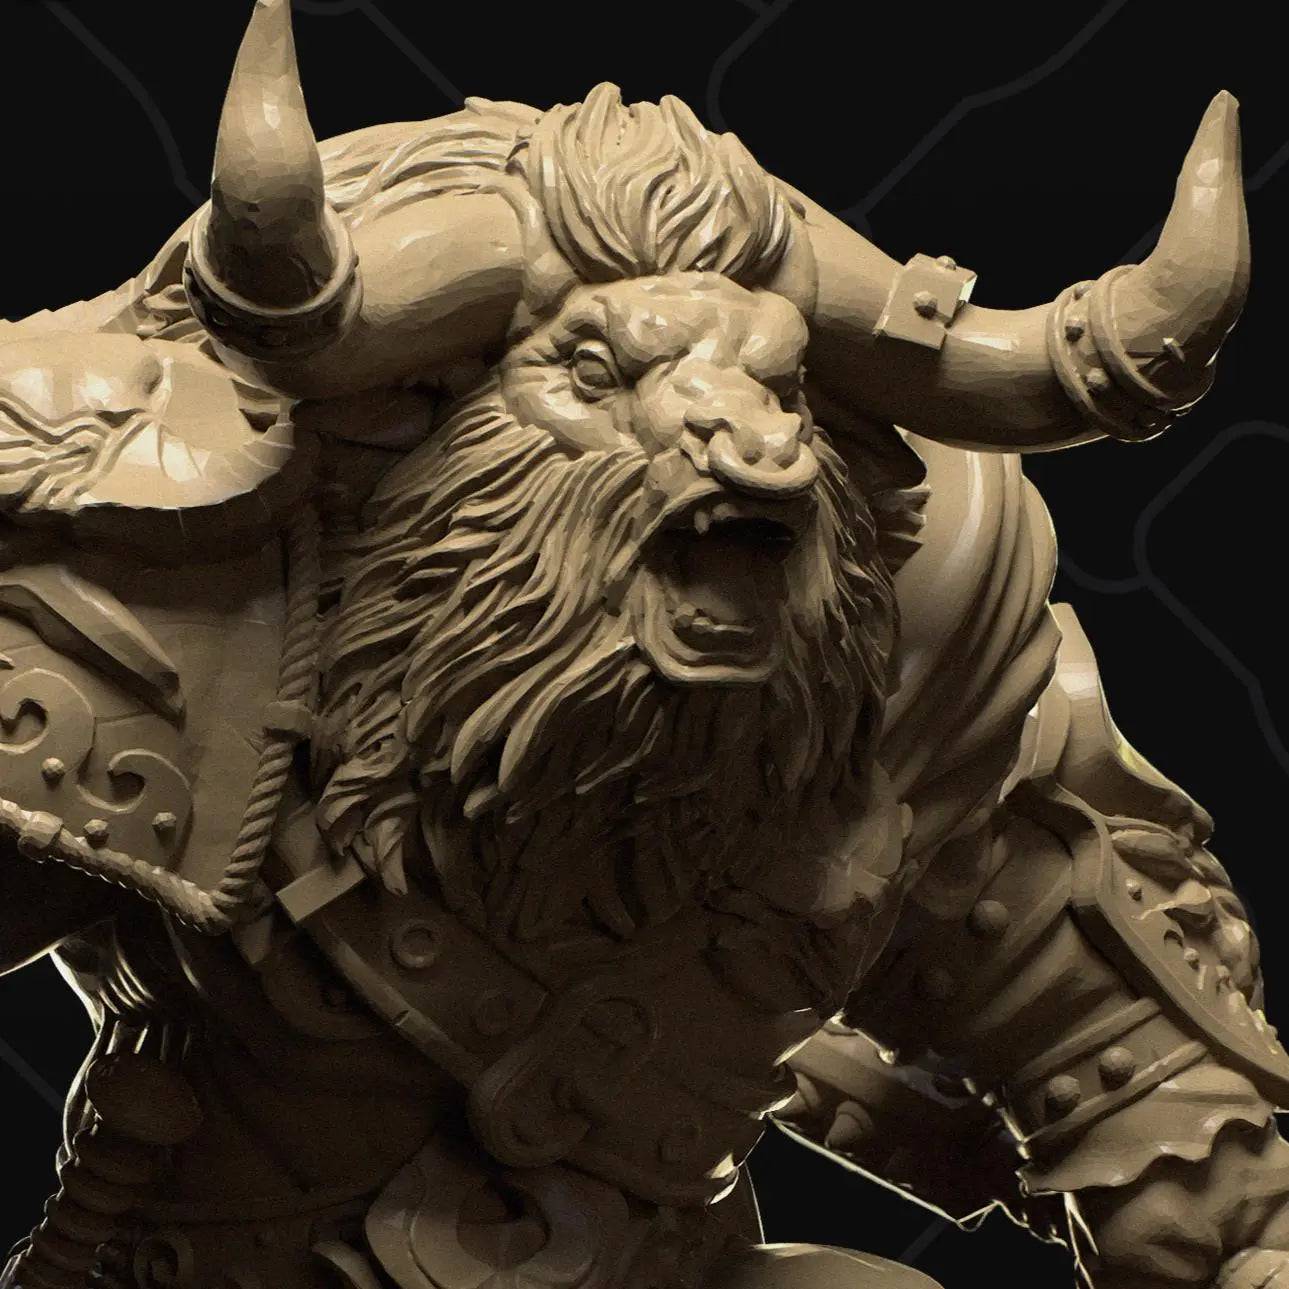 Minotaur Fighter Bellowing Holding Two Axes | D&D TTRPG Character Miniature | Collective Studio - Tattles Told 3D